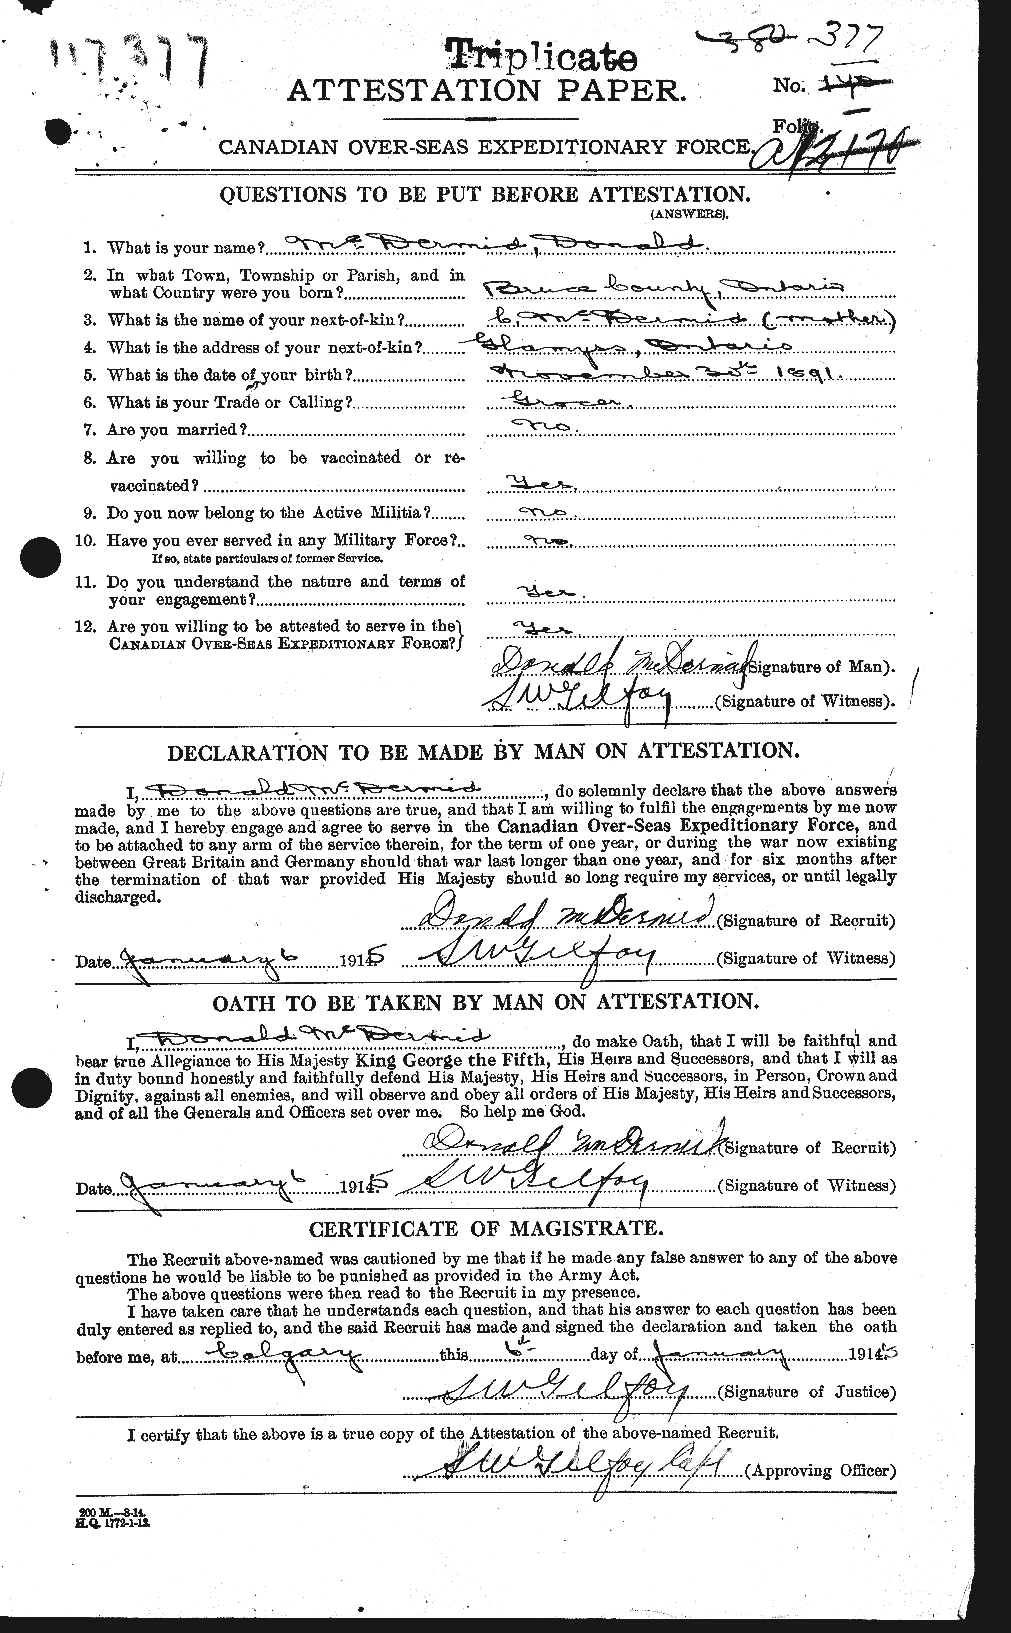 Personnel Records of the First World War - CEF 136158a